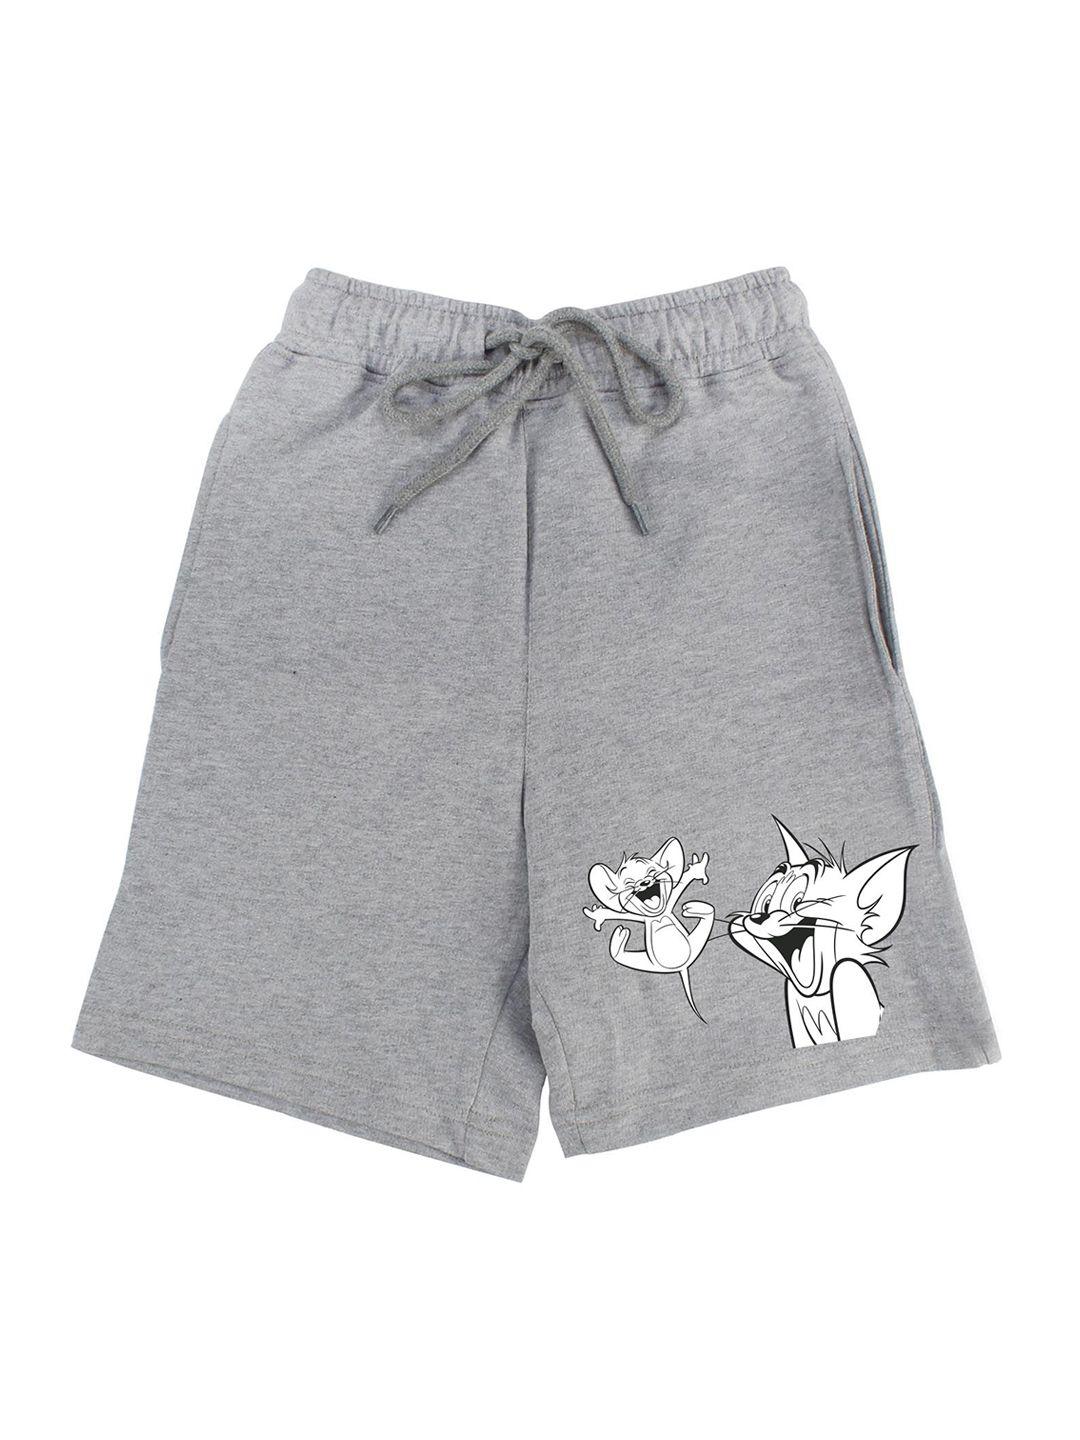 tom & jerry by wear your mind boys grey printed tom & jerry shorts